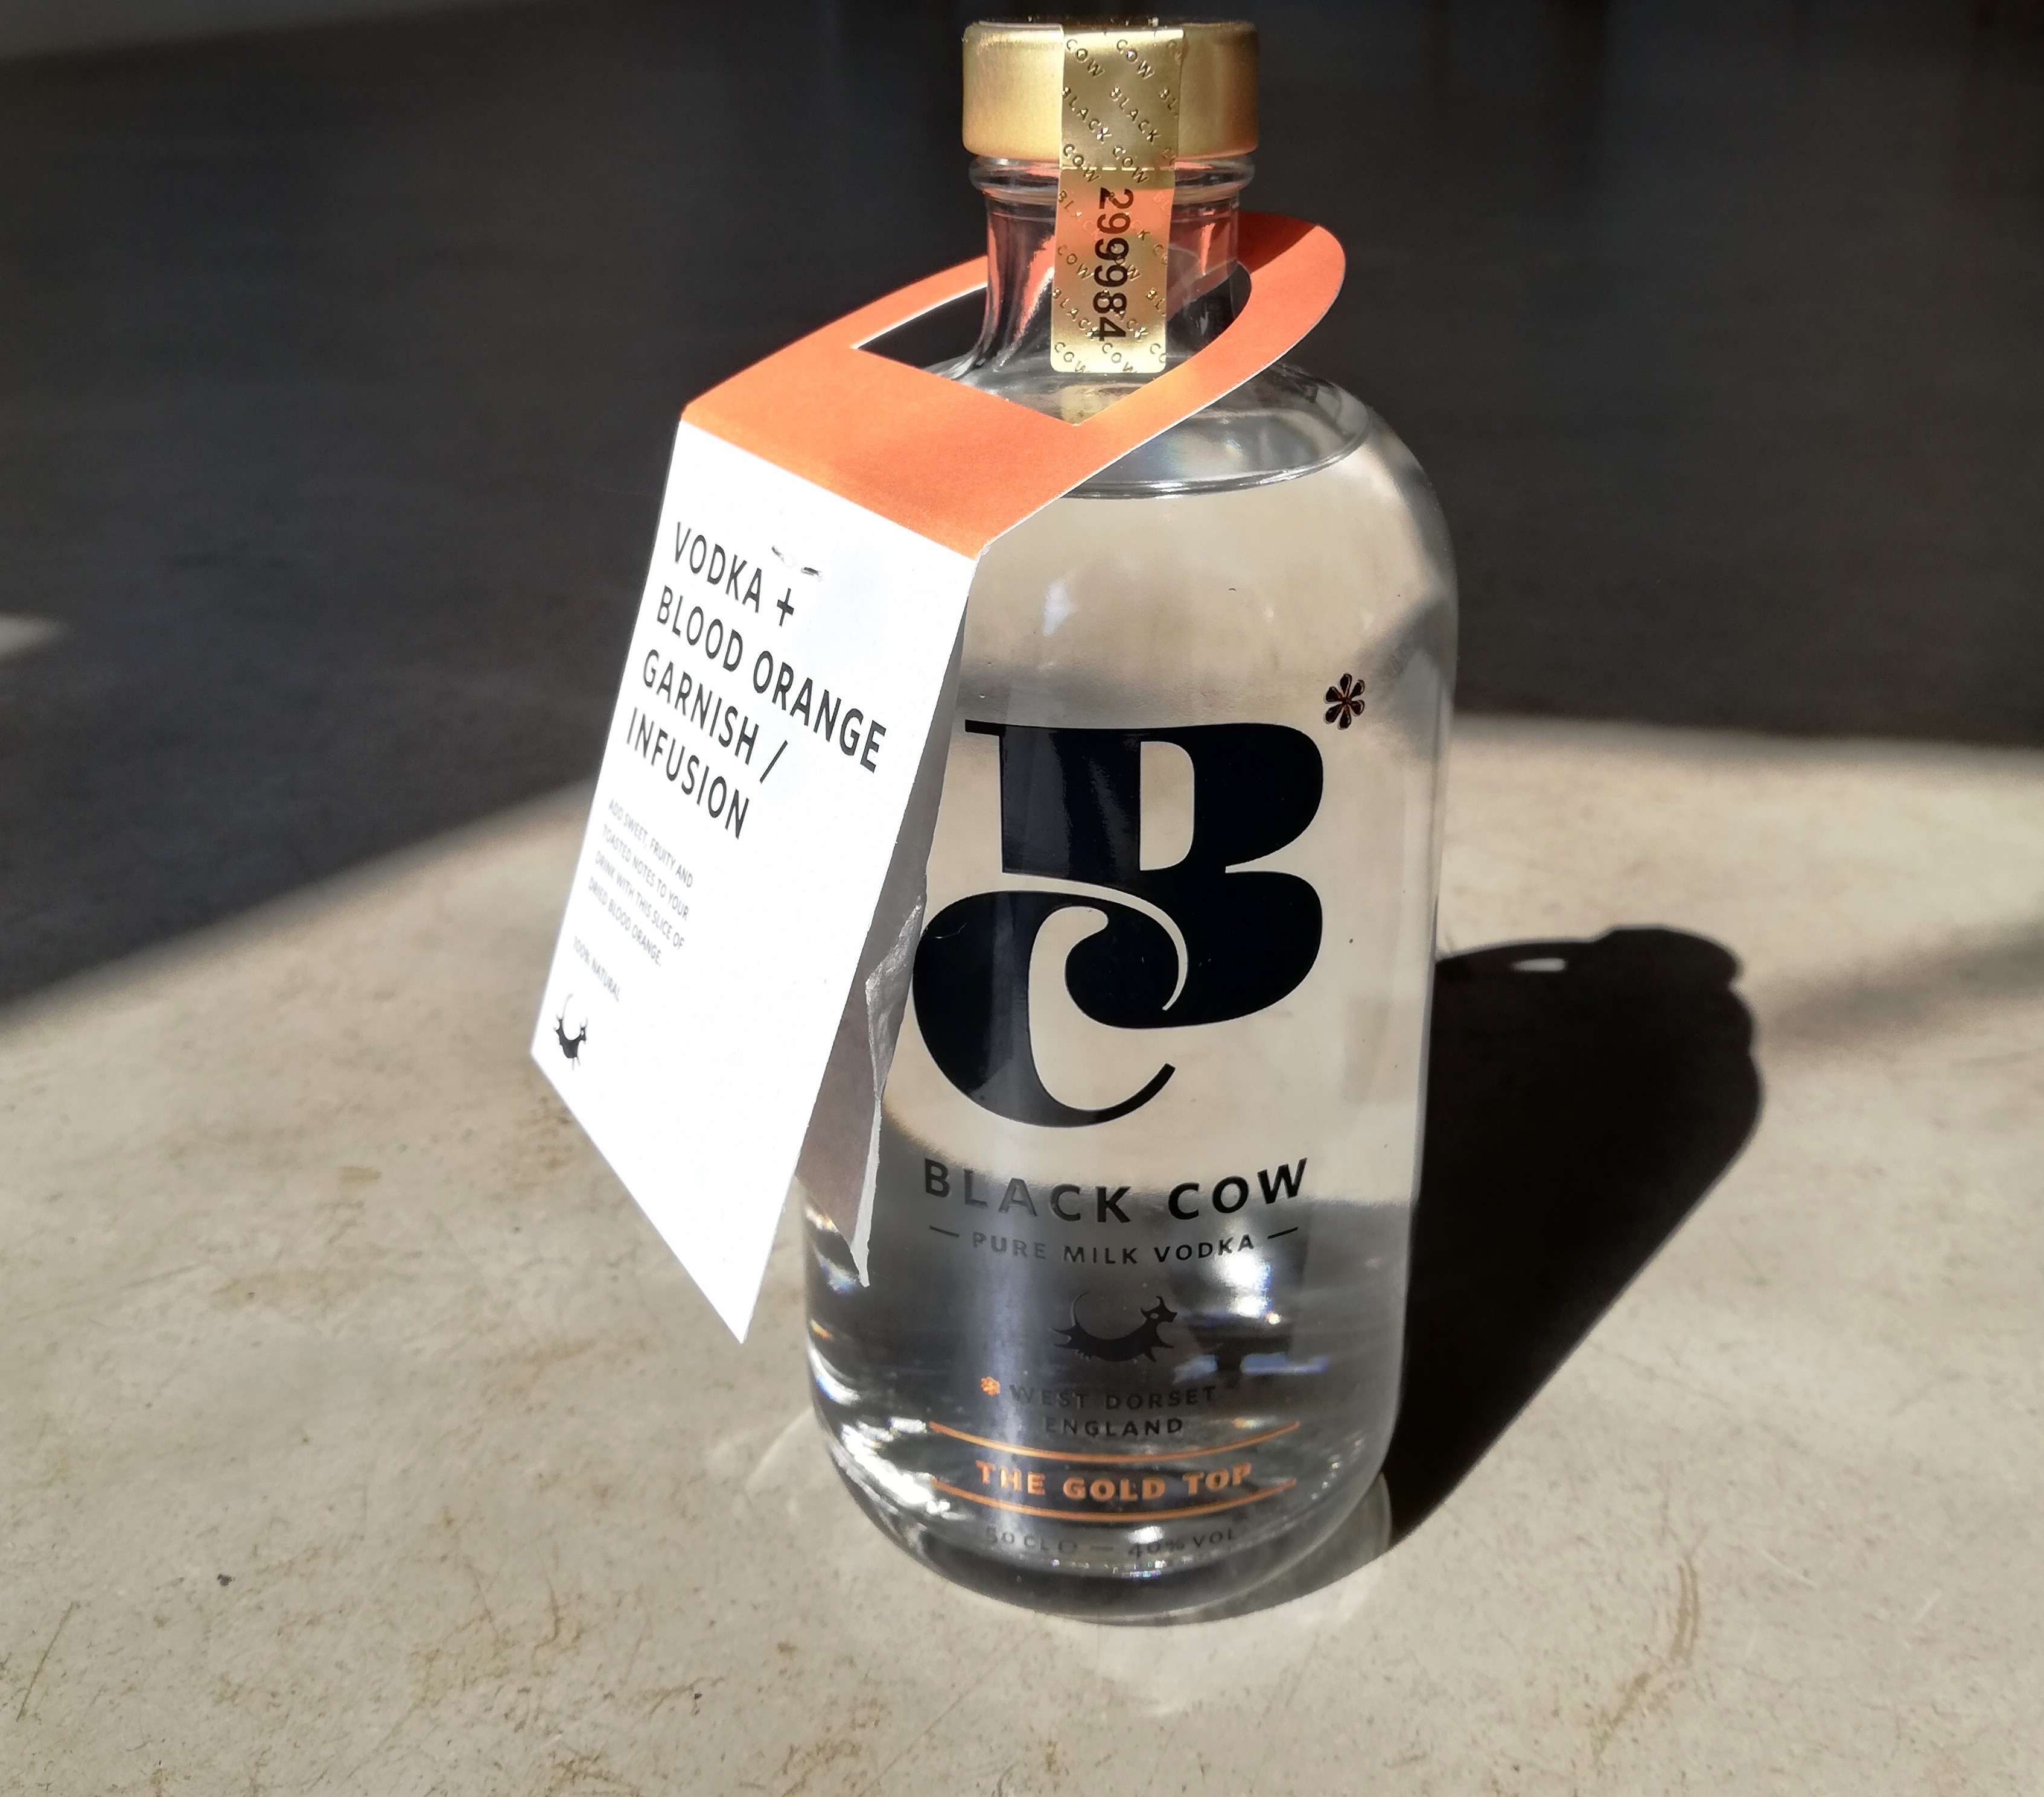 Black Cow Vodka Teams Up With M&s For Latest Project photo